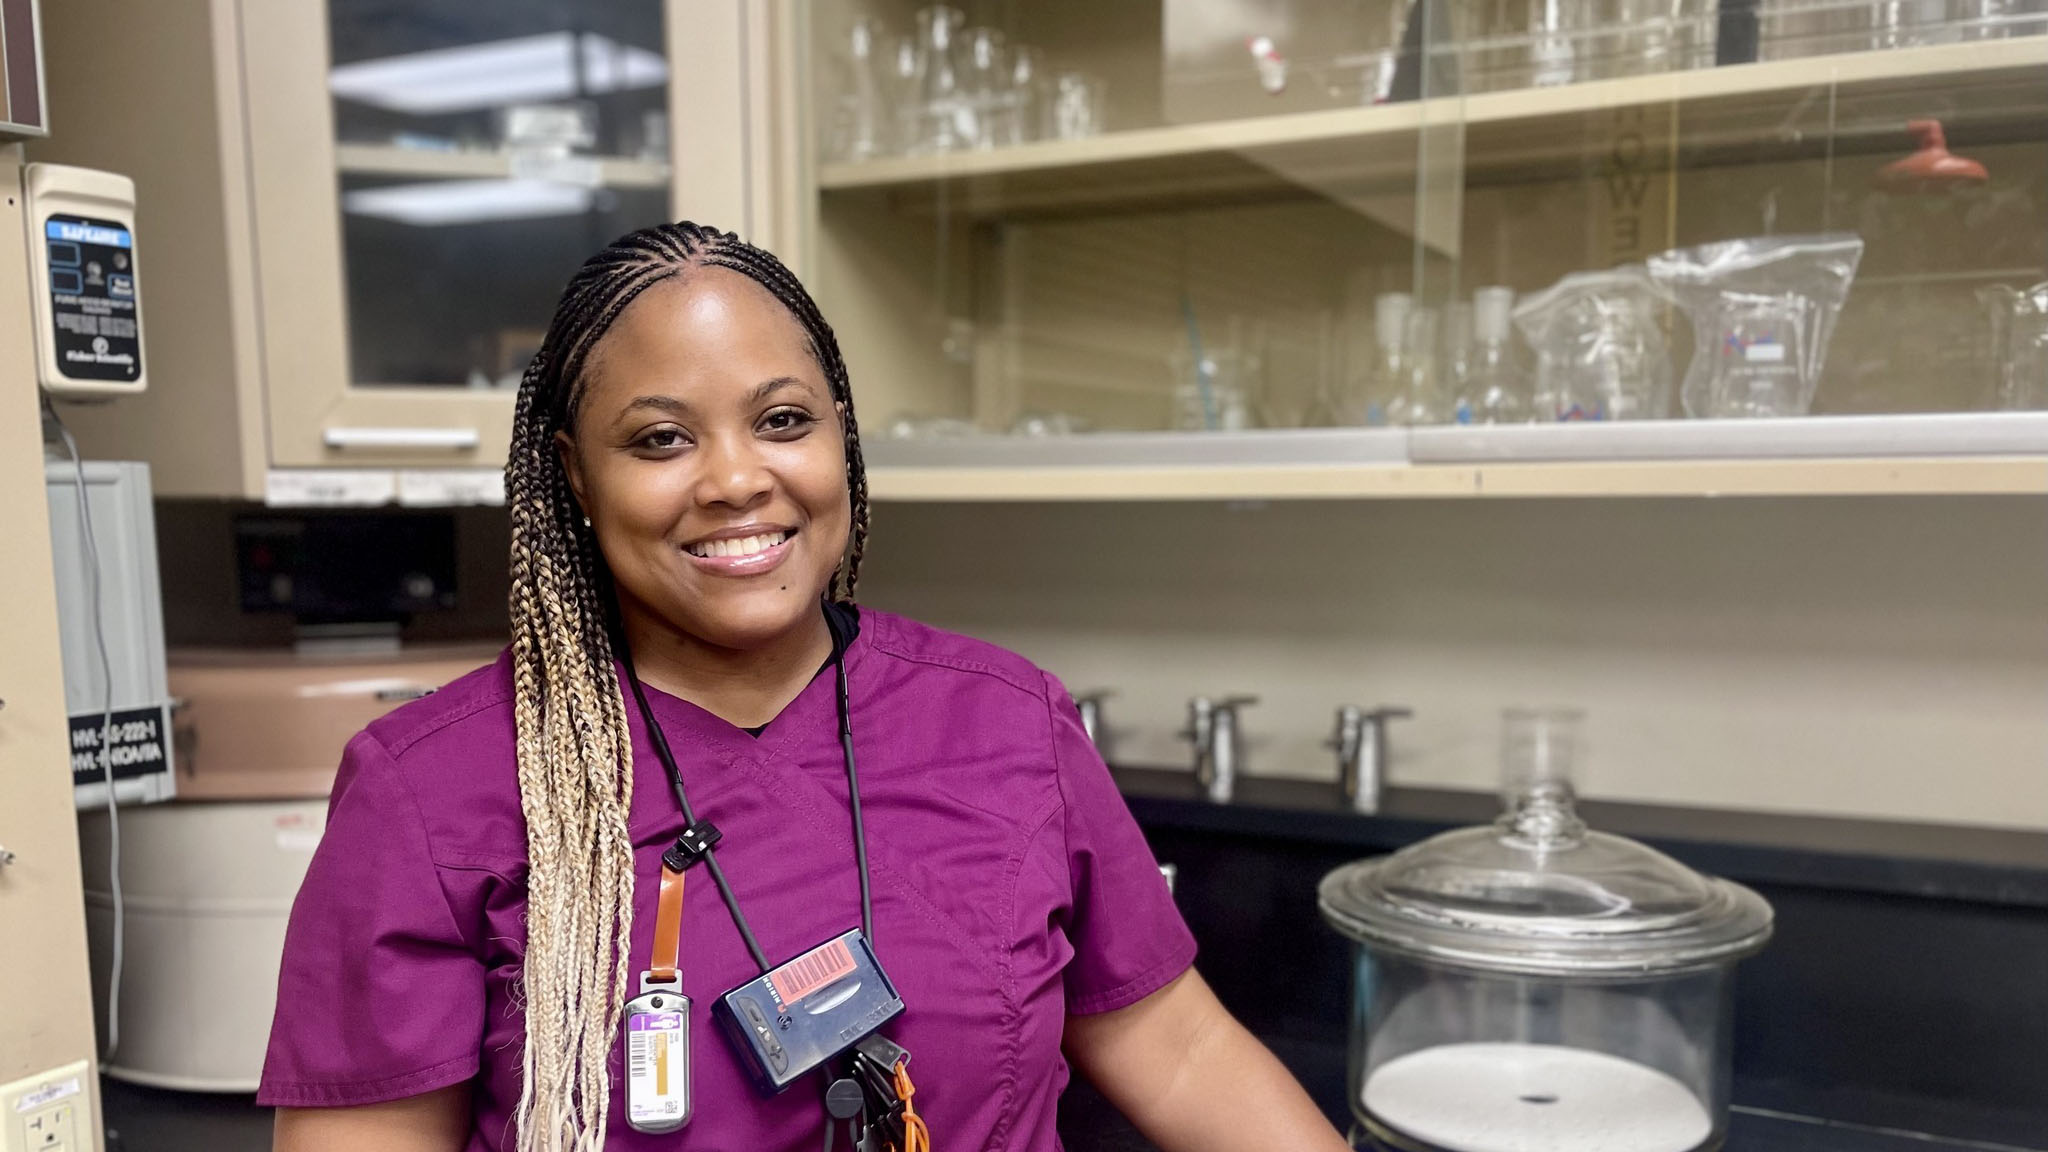 Sheryl Carpenter is a nuclear chemistry technician at River Bend Station